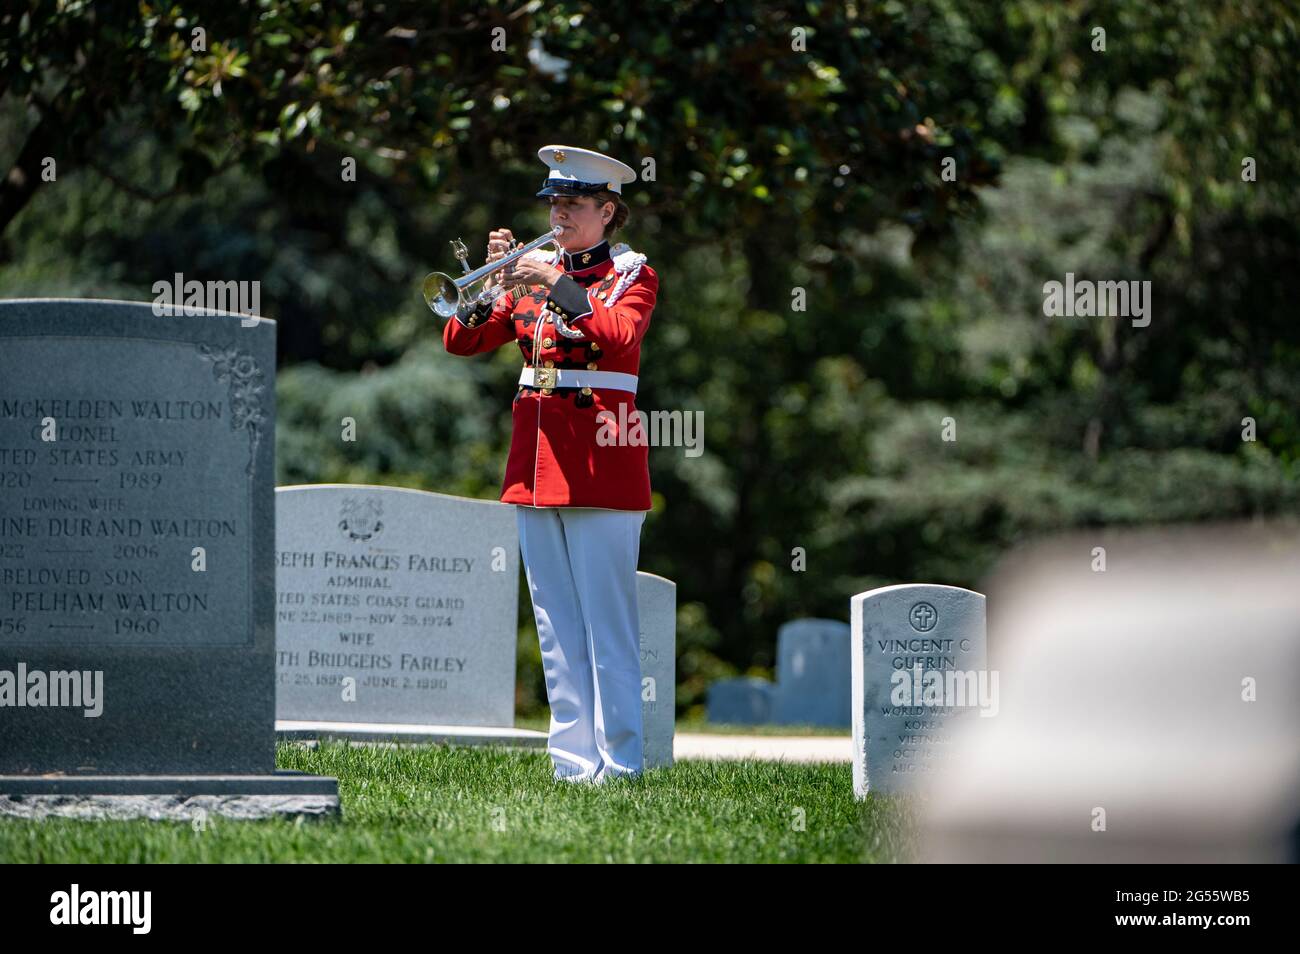 A trumpeter from the The President’s Own Marine Band plays Taps during a full honors ceremony for former U.S. Senator and Marine Corps 1st Lt. John Warner during his funeral in Arlington National Cemetery June 23, 2021 in Arlington, Virginia. Warner, a Senator for Virginia for 30-years and Secretary of the Navy died May 25th. Stock Photo